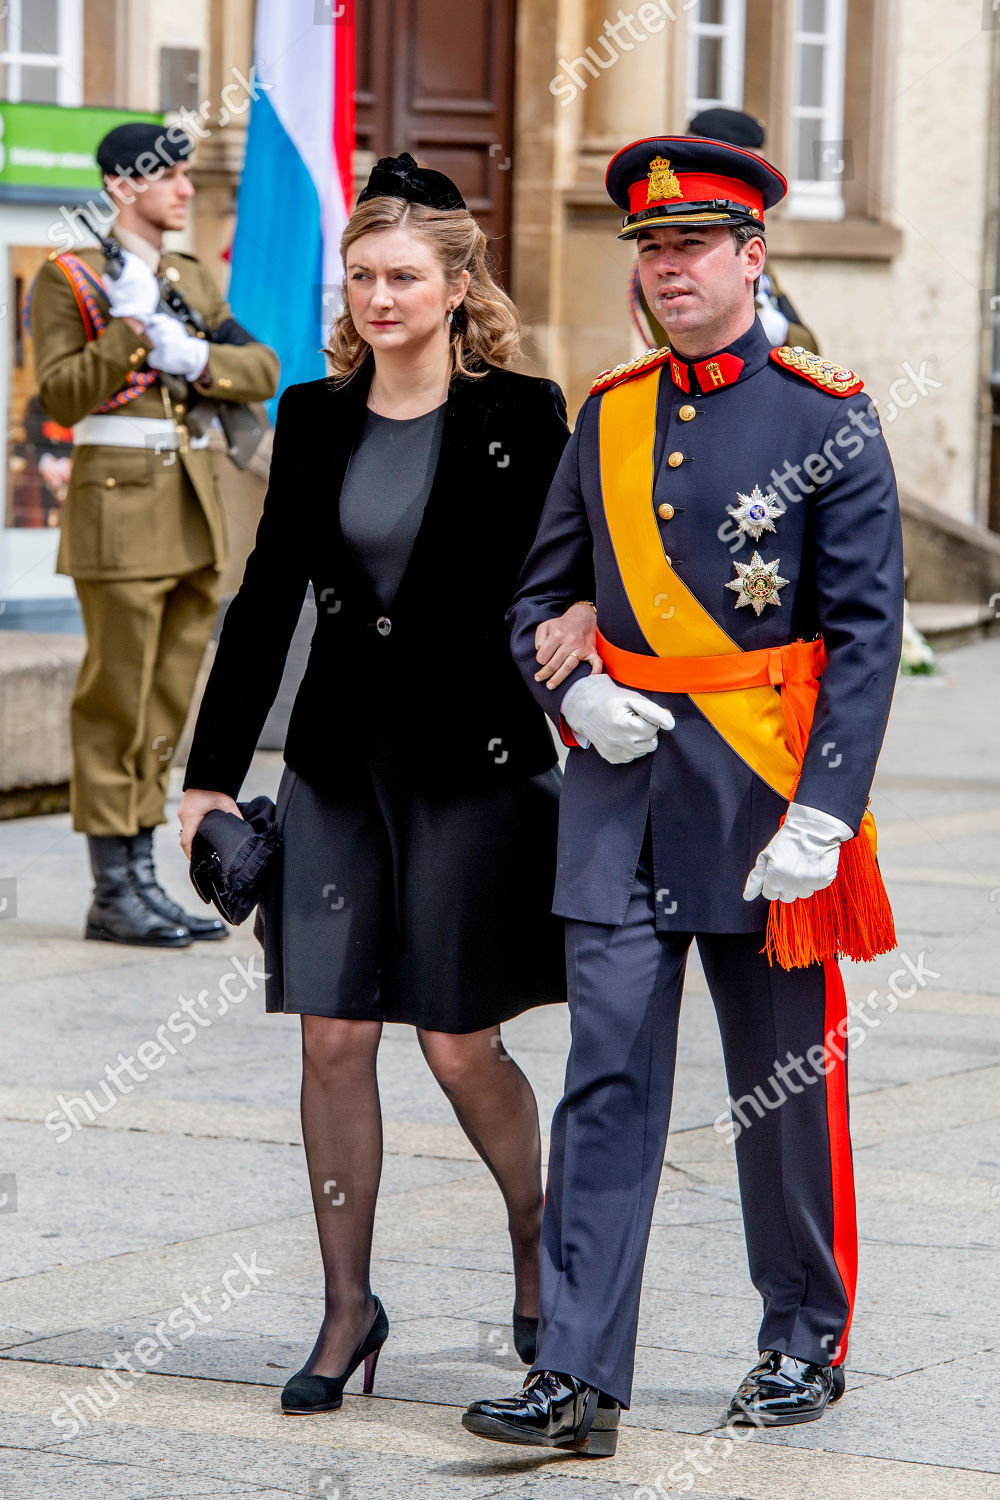 grand-duke-jean-funeral-cathedral-notre-dame-luxembourg-shutterstock-editorial-10228100gx.jpg